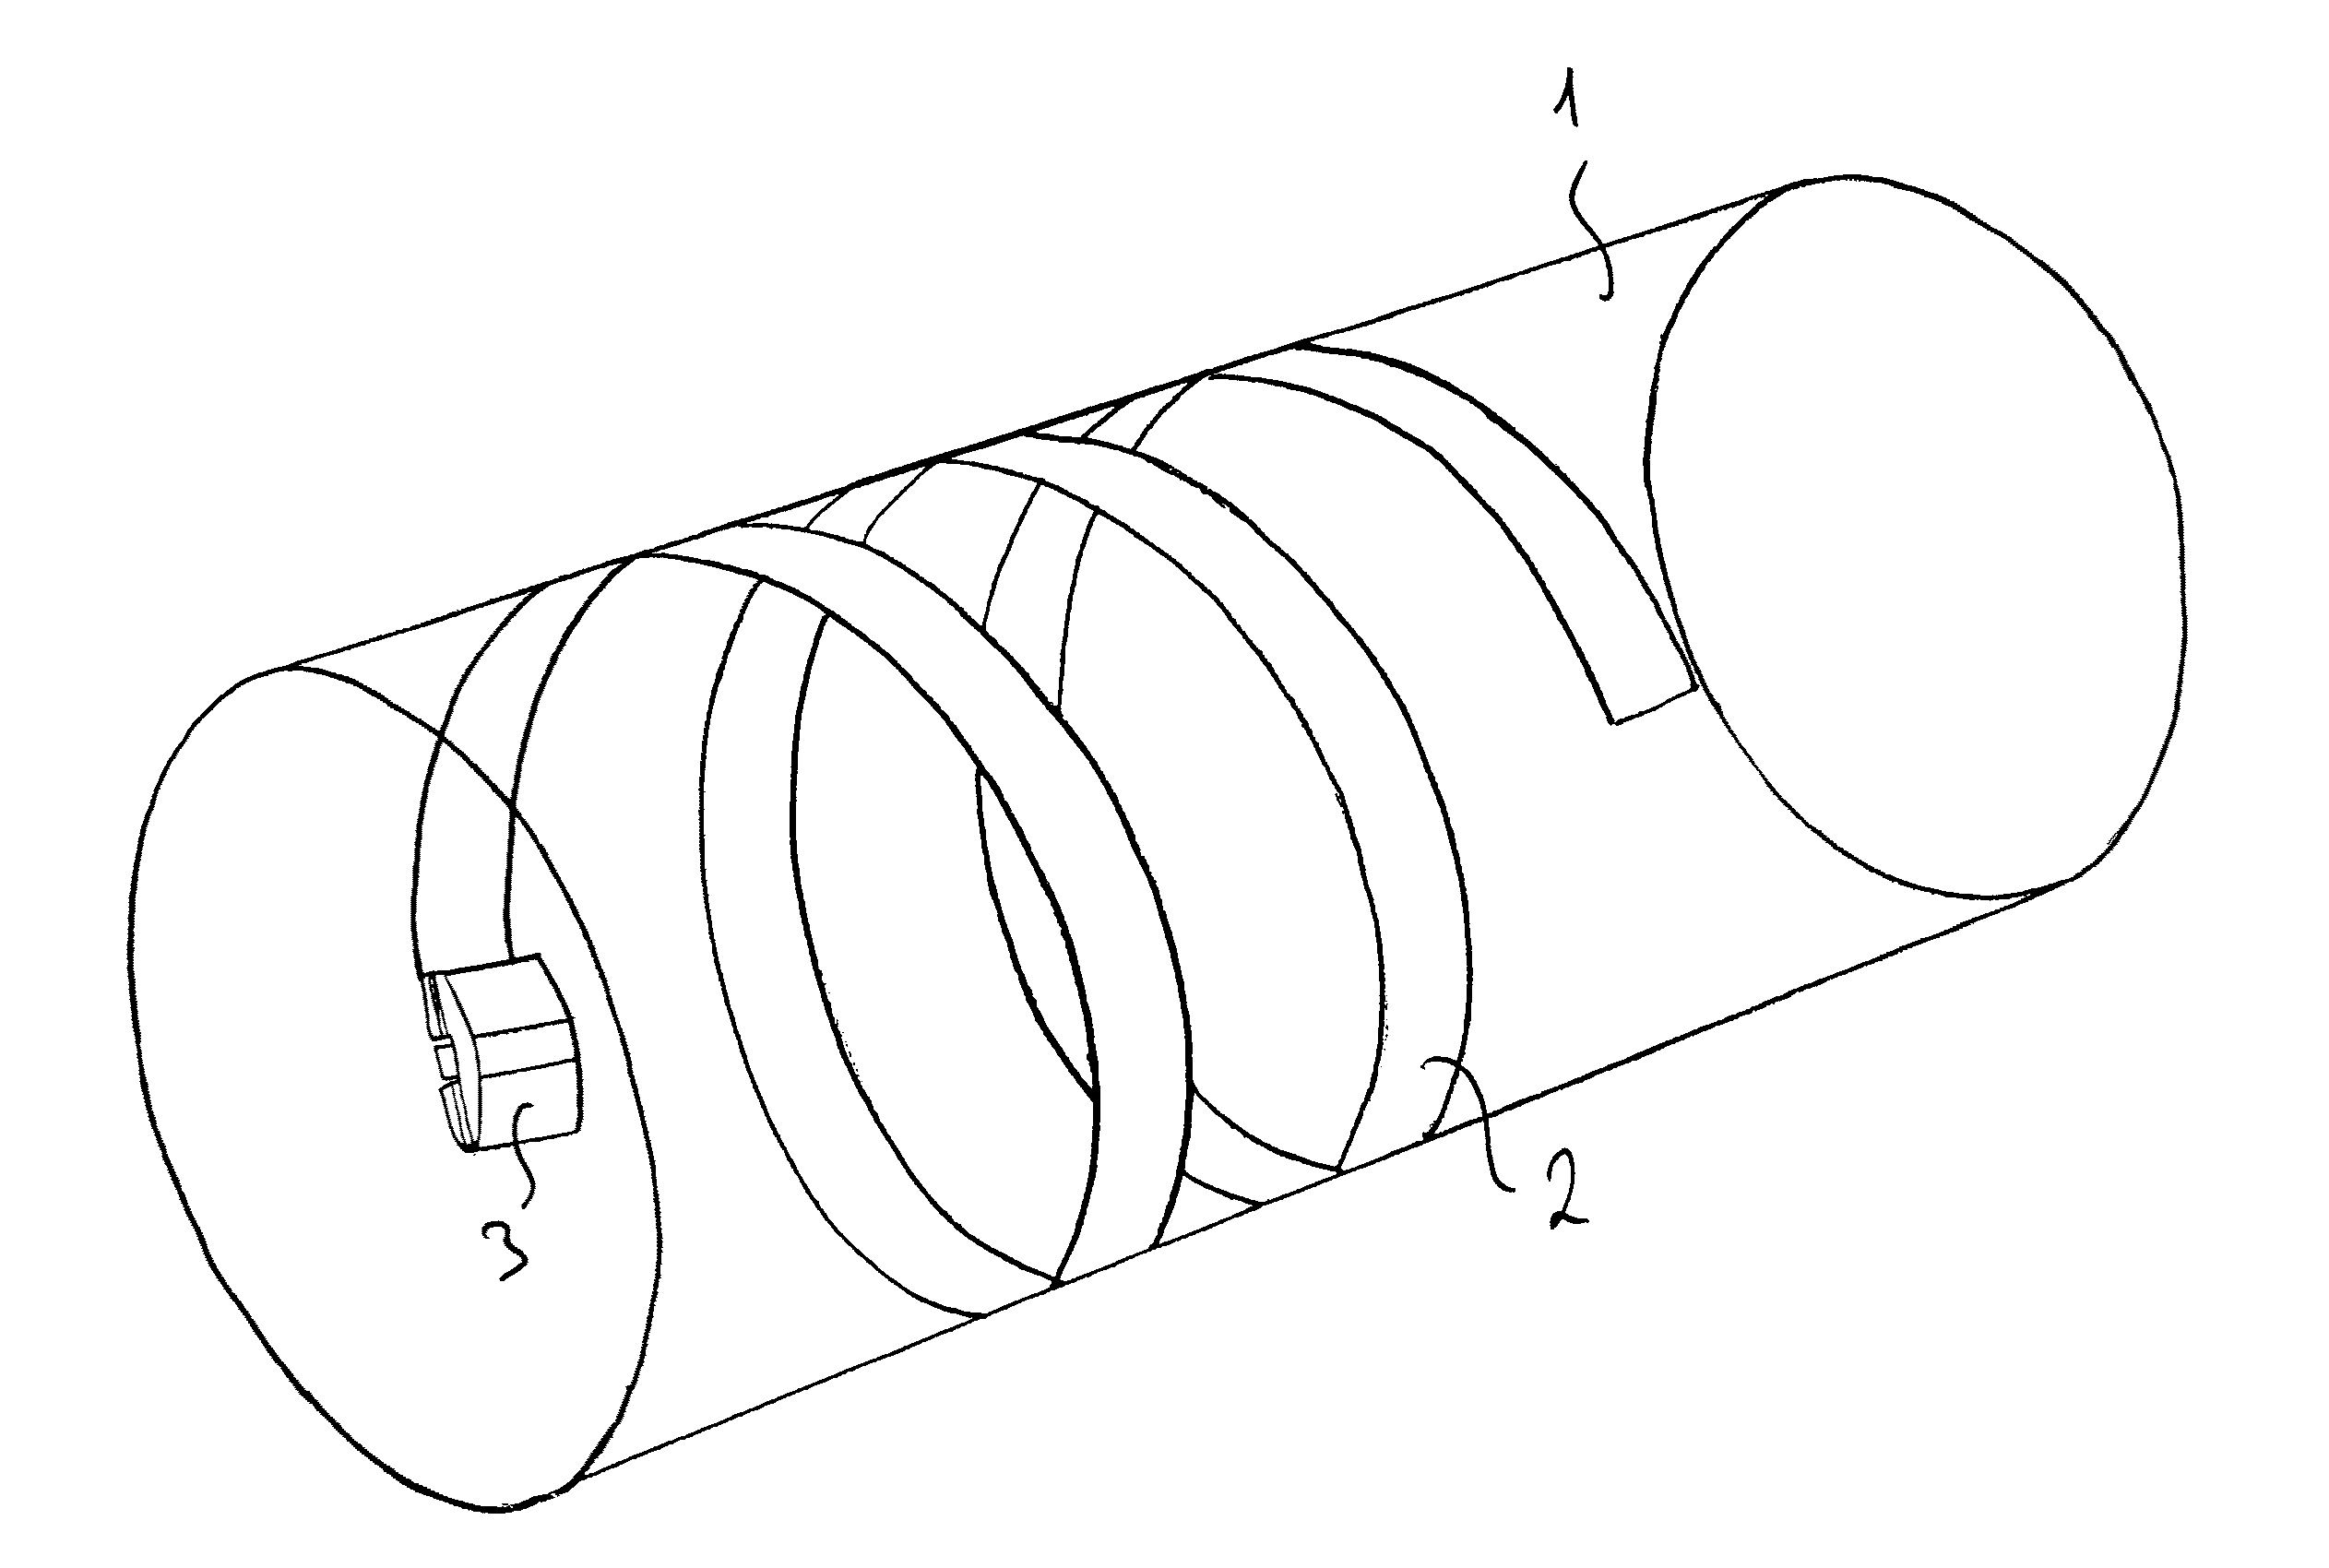 Device and Method for Nondestructive Testing of Pipelines